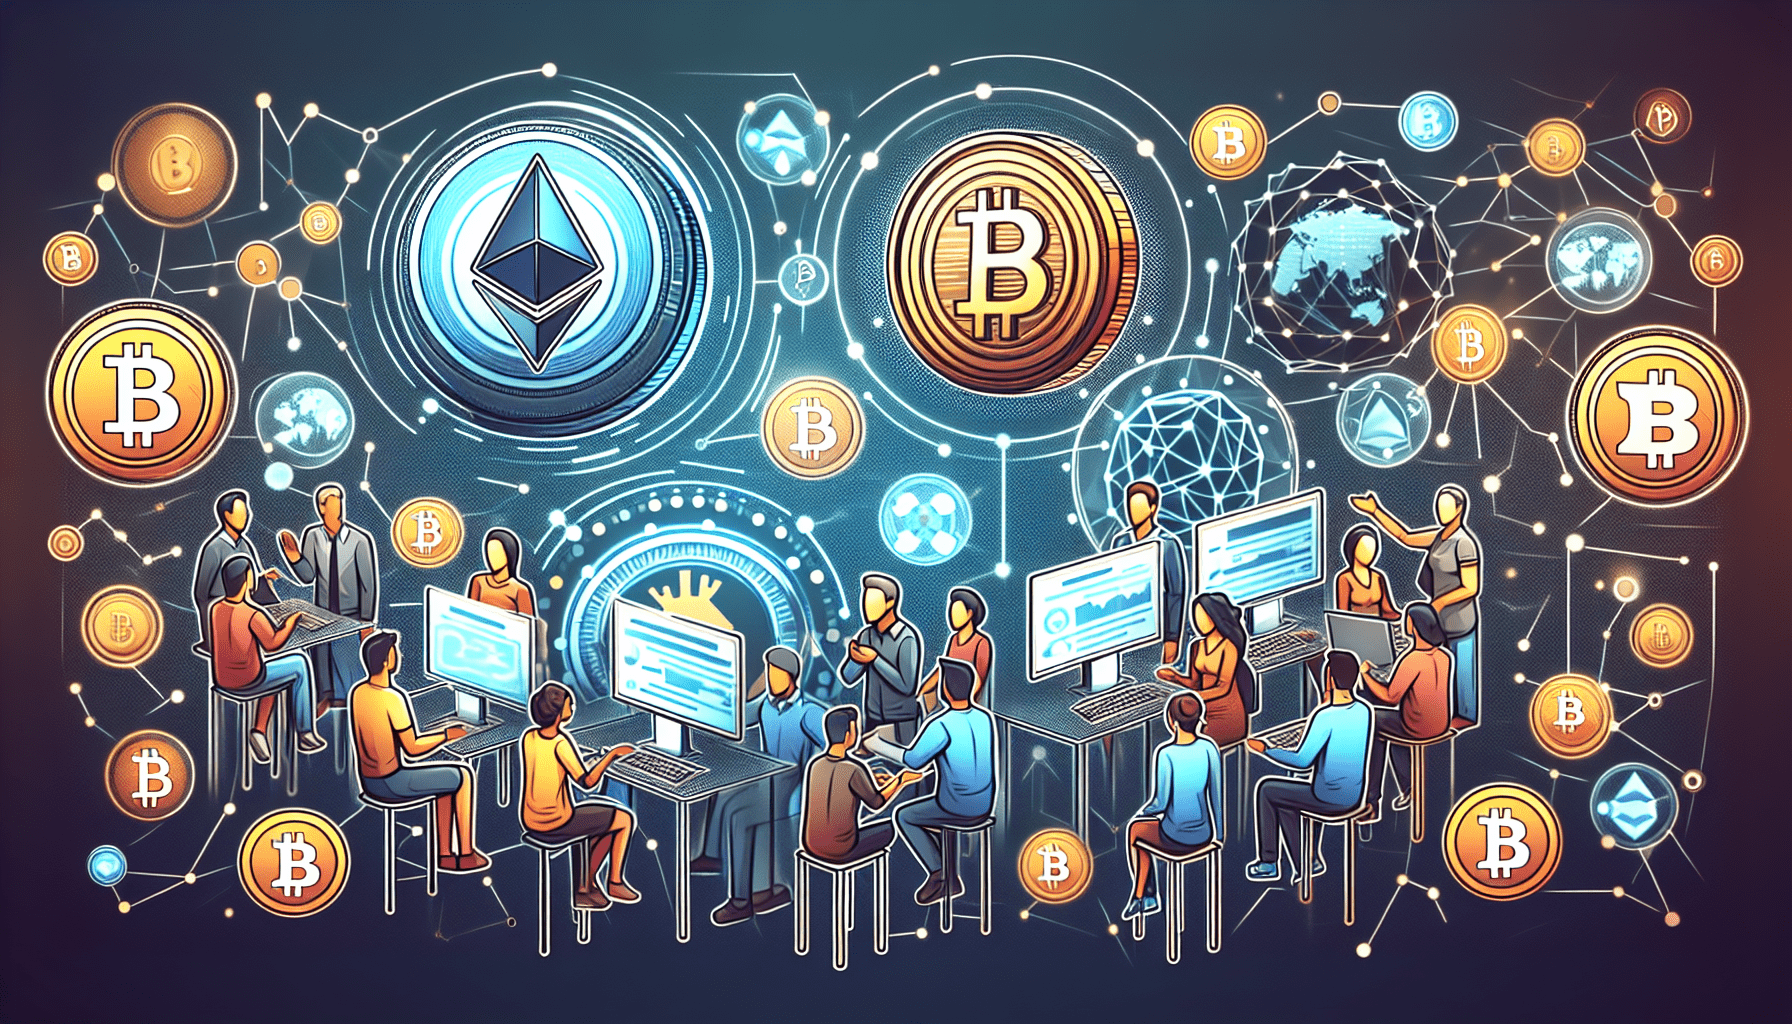 Join Communities: Participate In Cryptocurrency Communities And Forums.